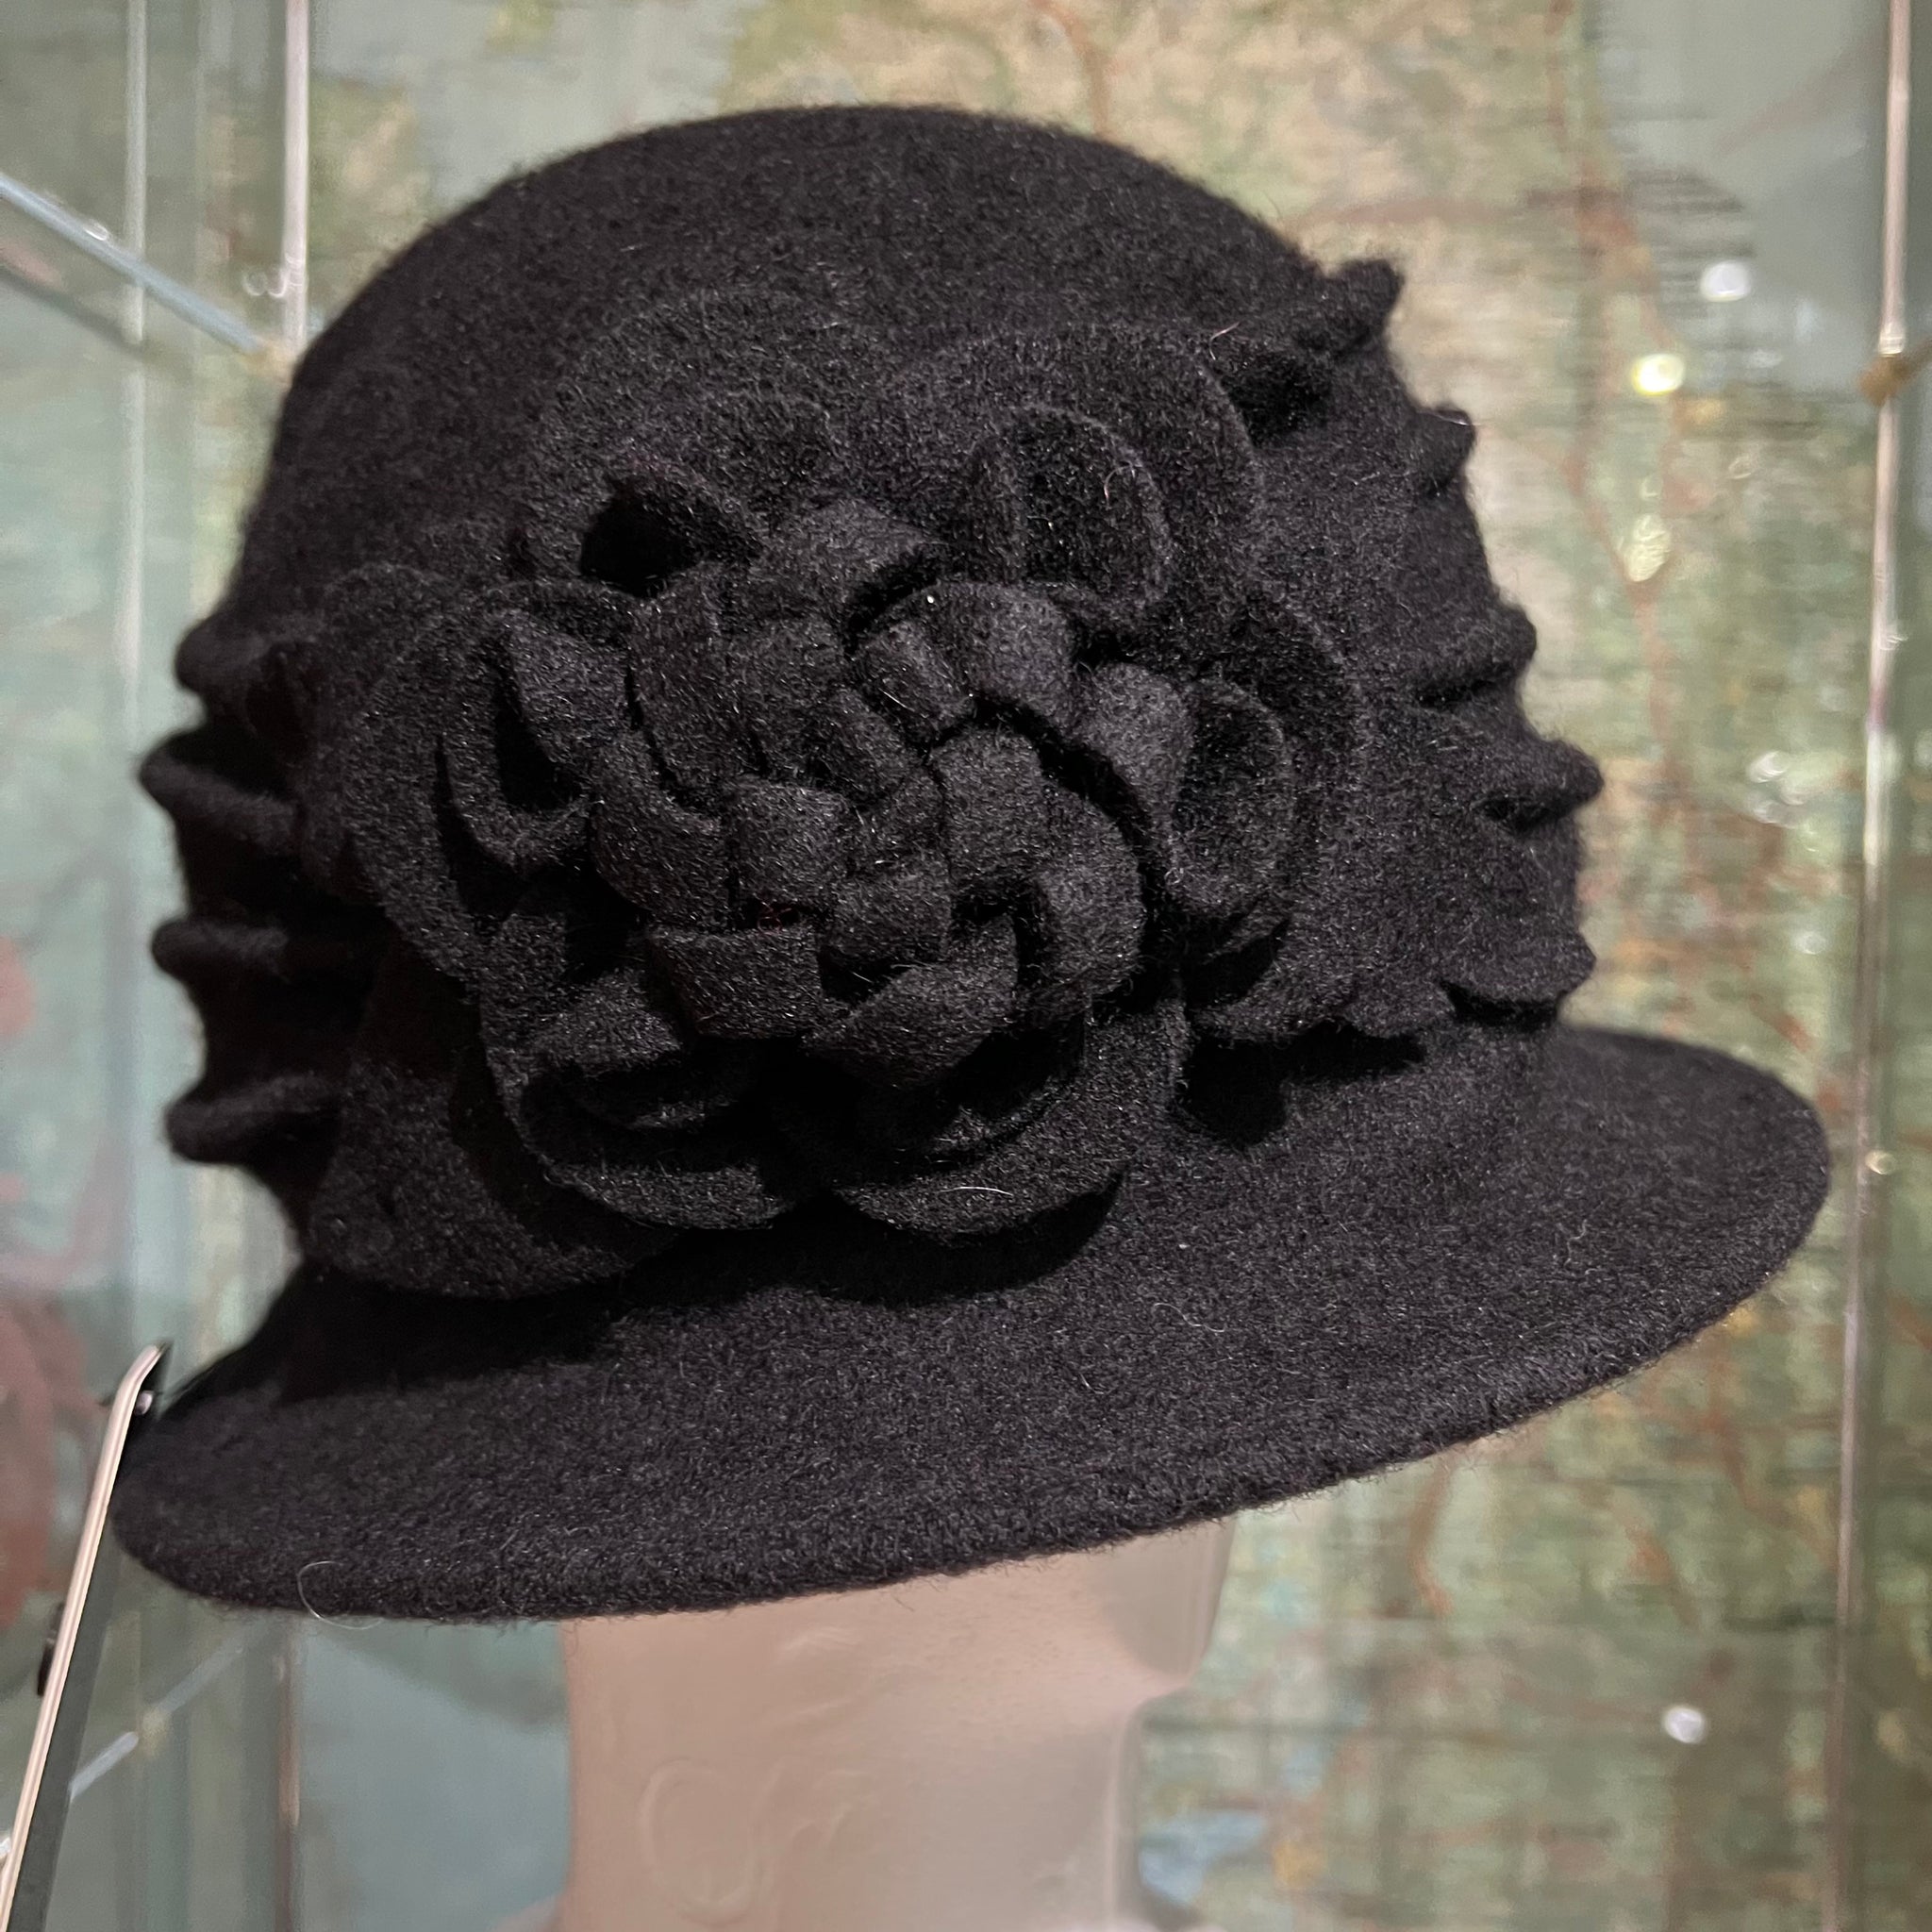 Soft Wool Felt Pull-On Cloche With Flower